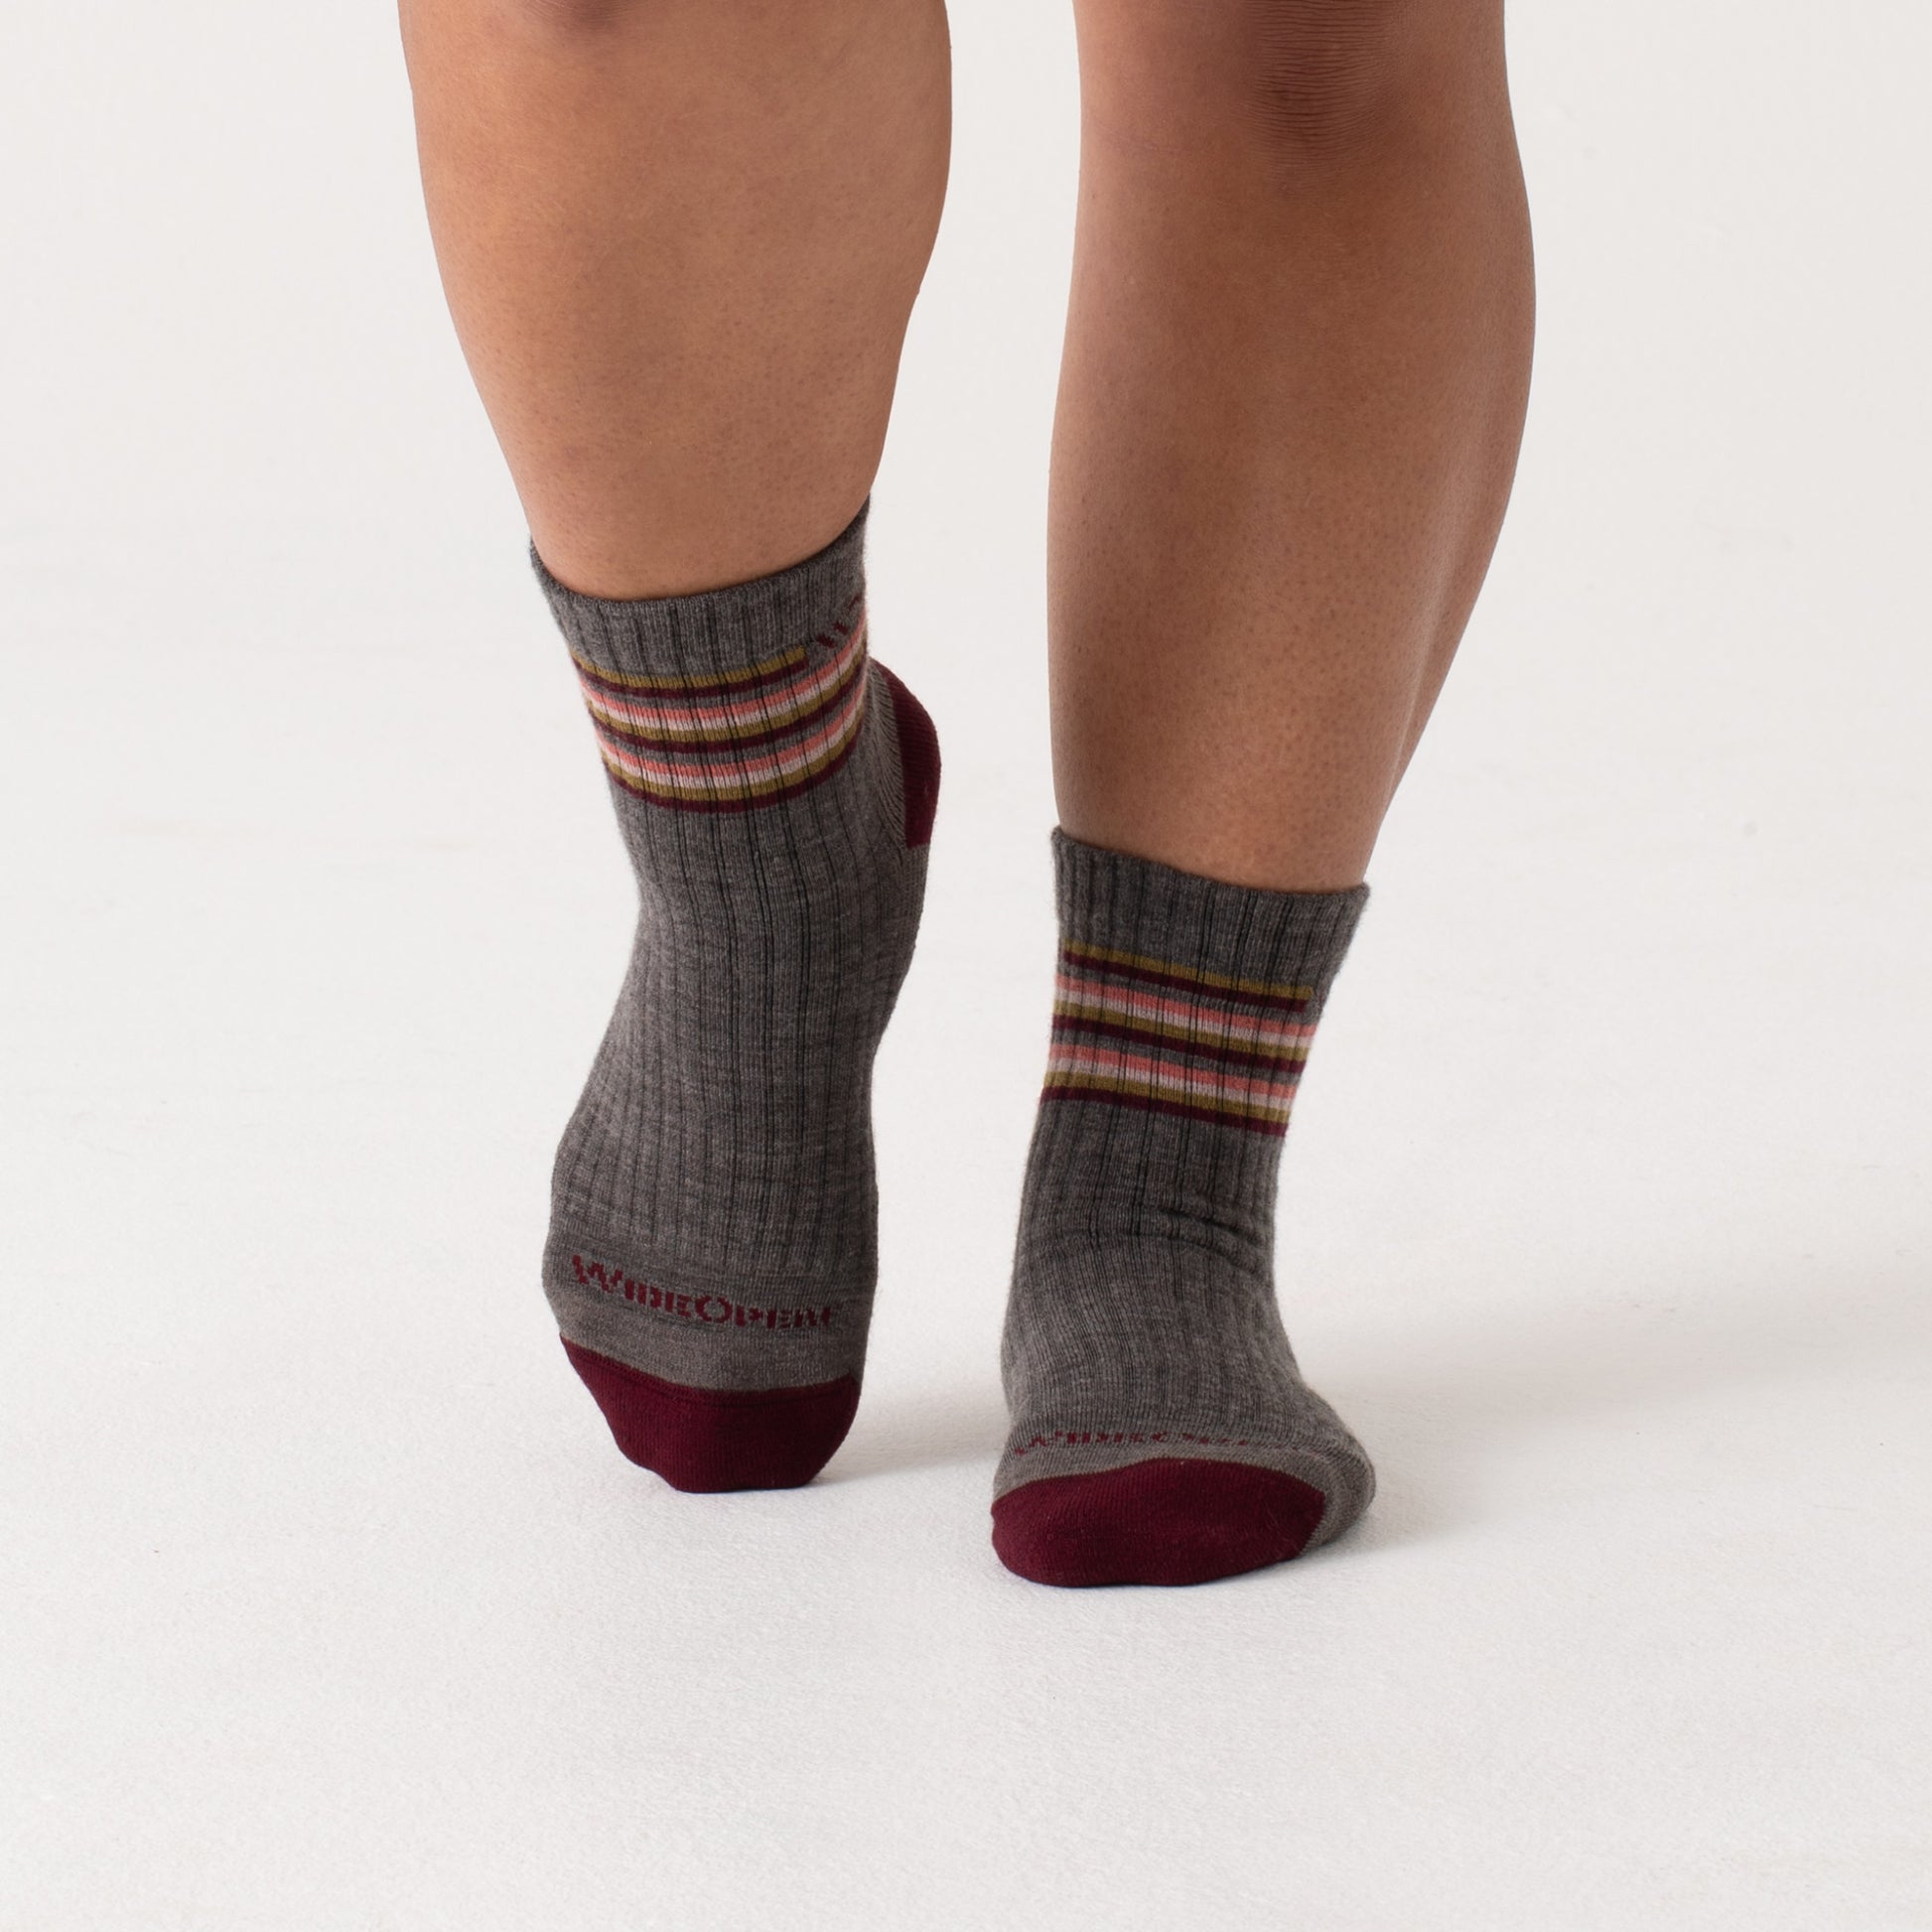 On model Micro Crews: maroon heel/toe, taupe body with Stripes below the cuff --Taupe